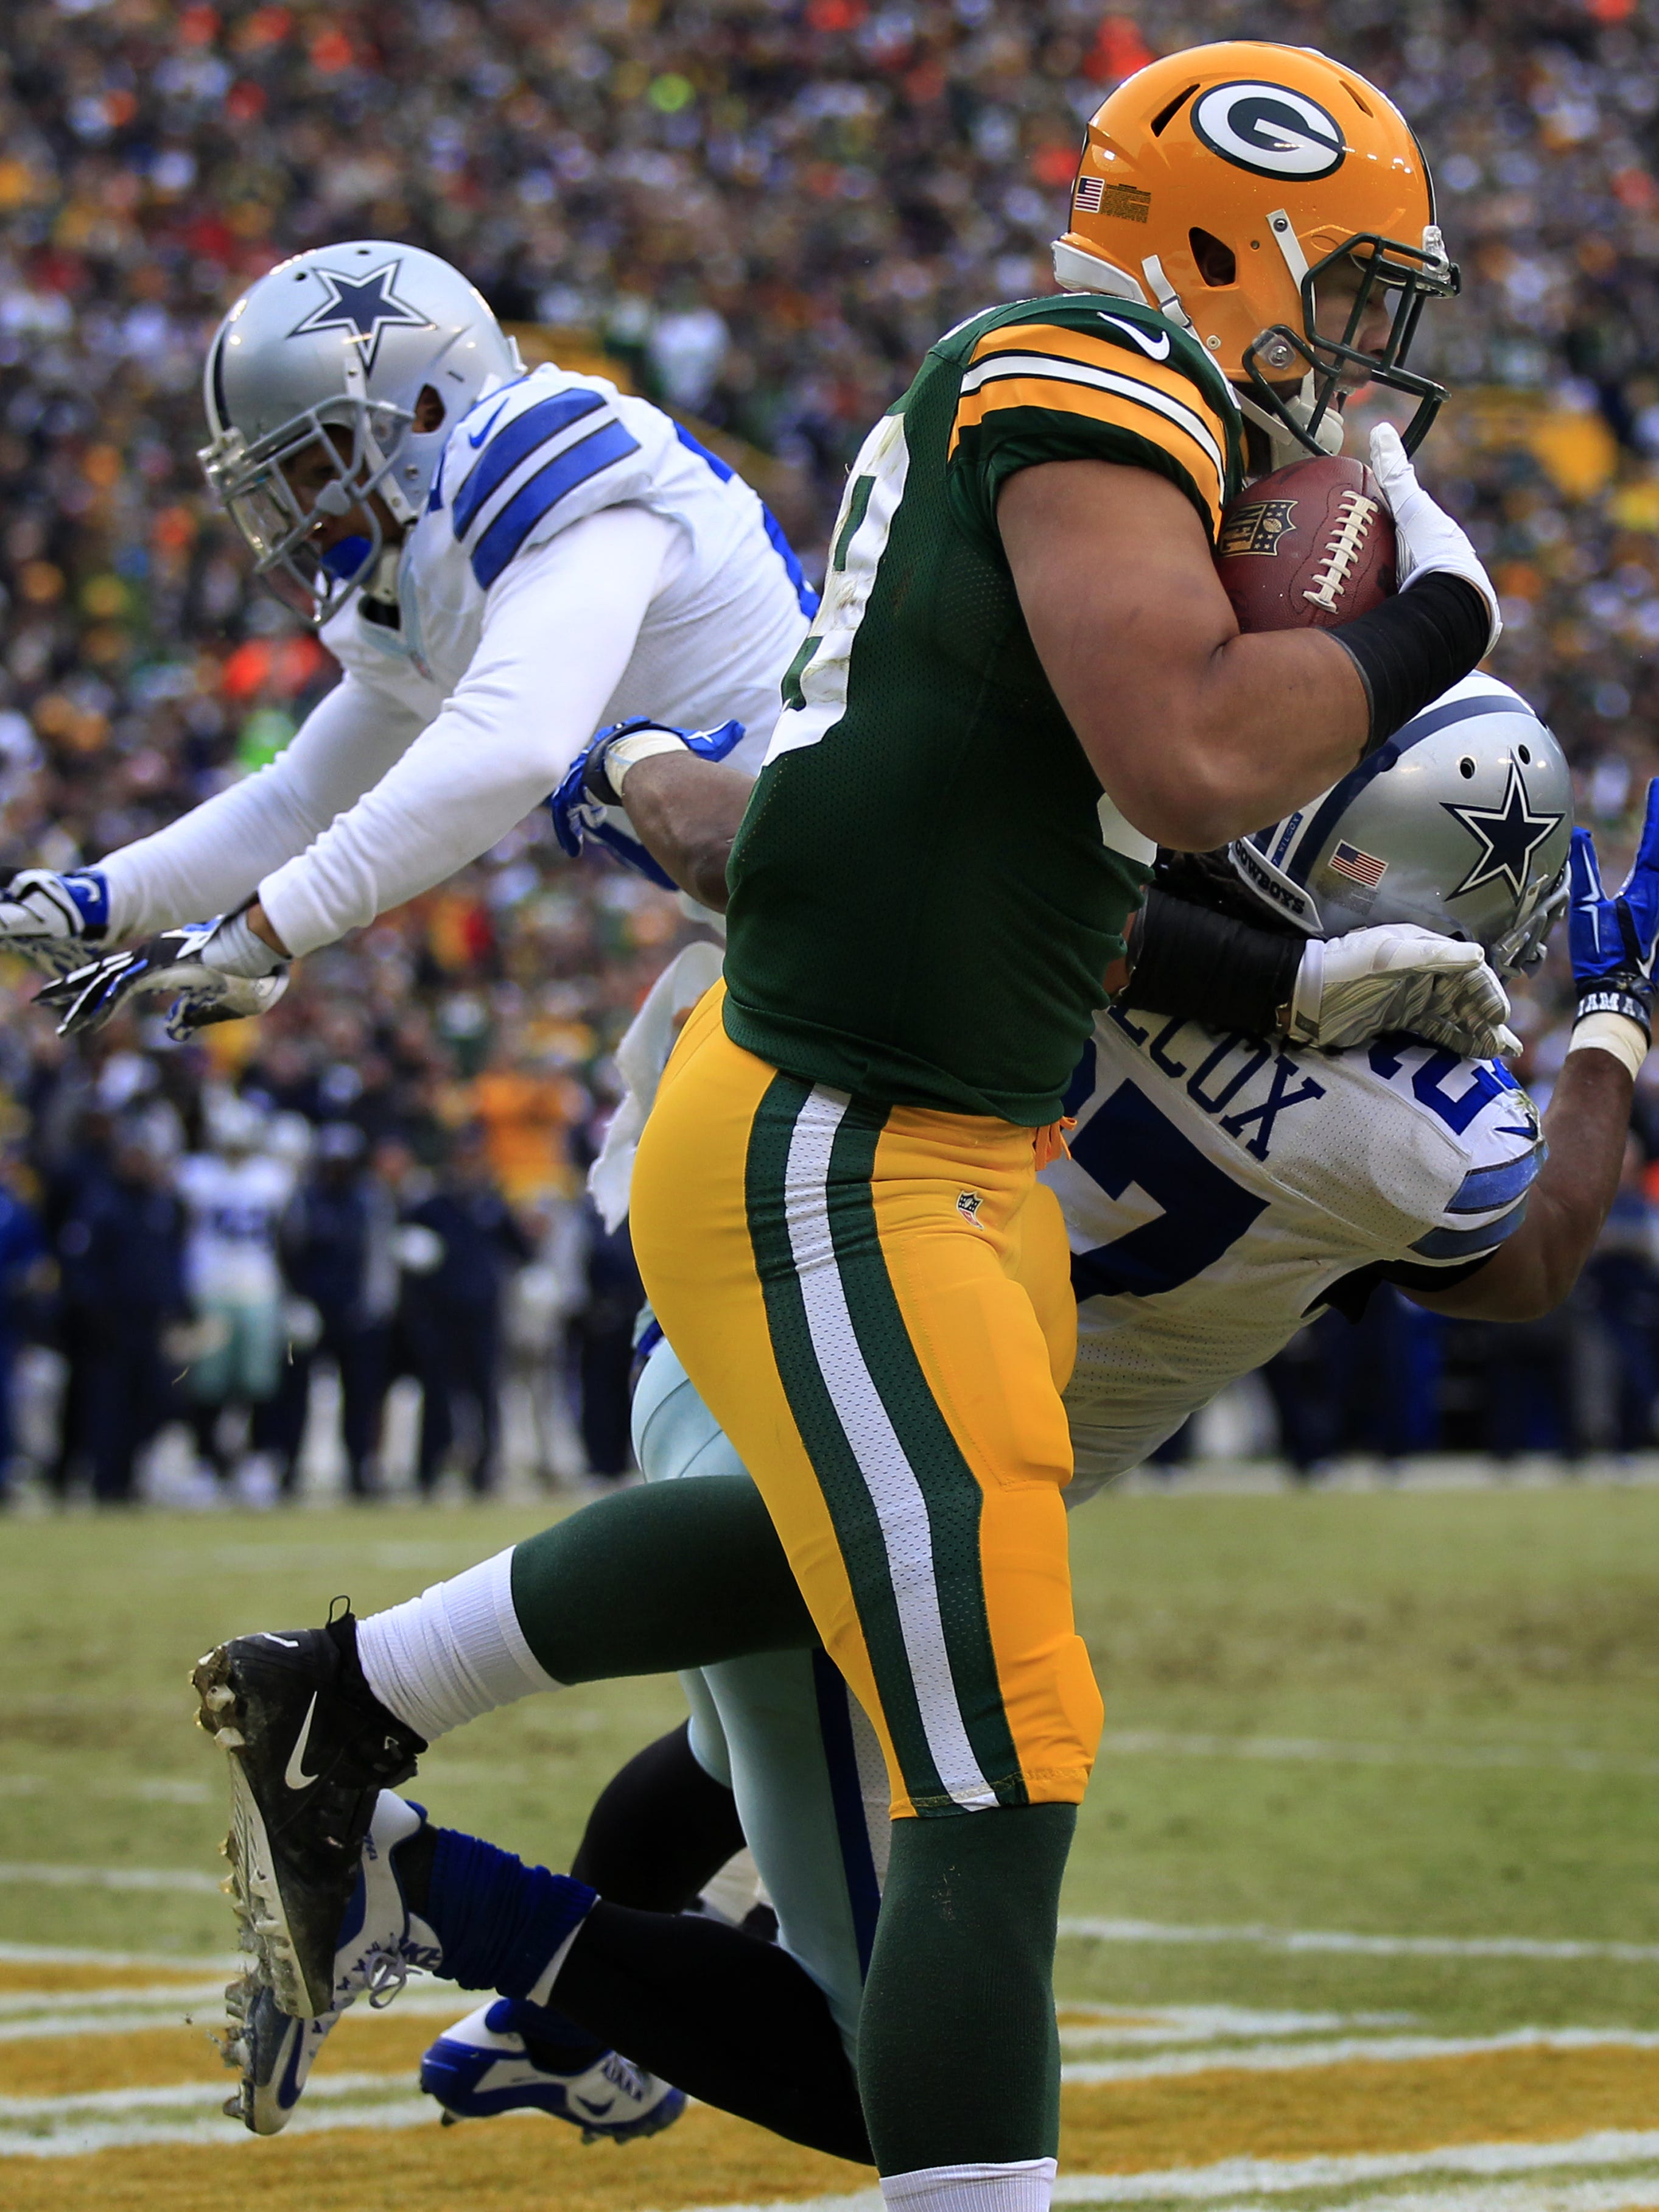 Green Bay Packers tight end Richard Rodgers catches the go-ahead touchdown pass from quarterback Aaron Rodgers in the fourth quarter of Sunday's NFC divisional playoff game against the Dallas Cowboys at Lambeau Field.